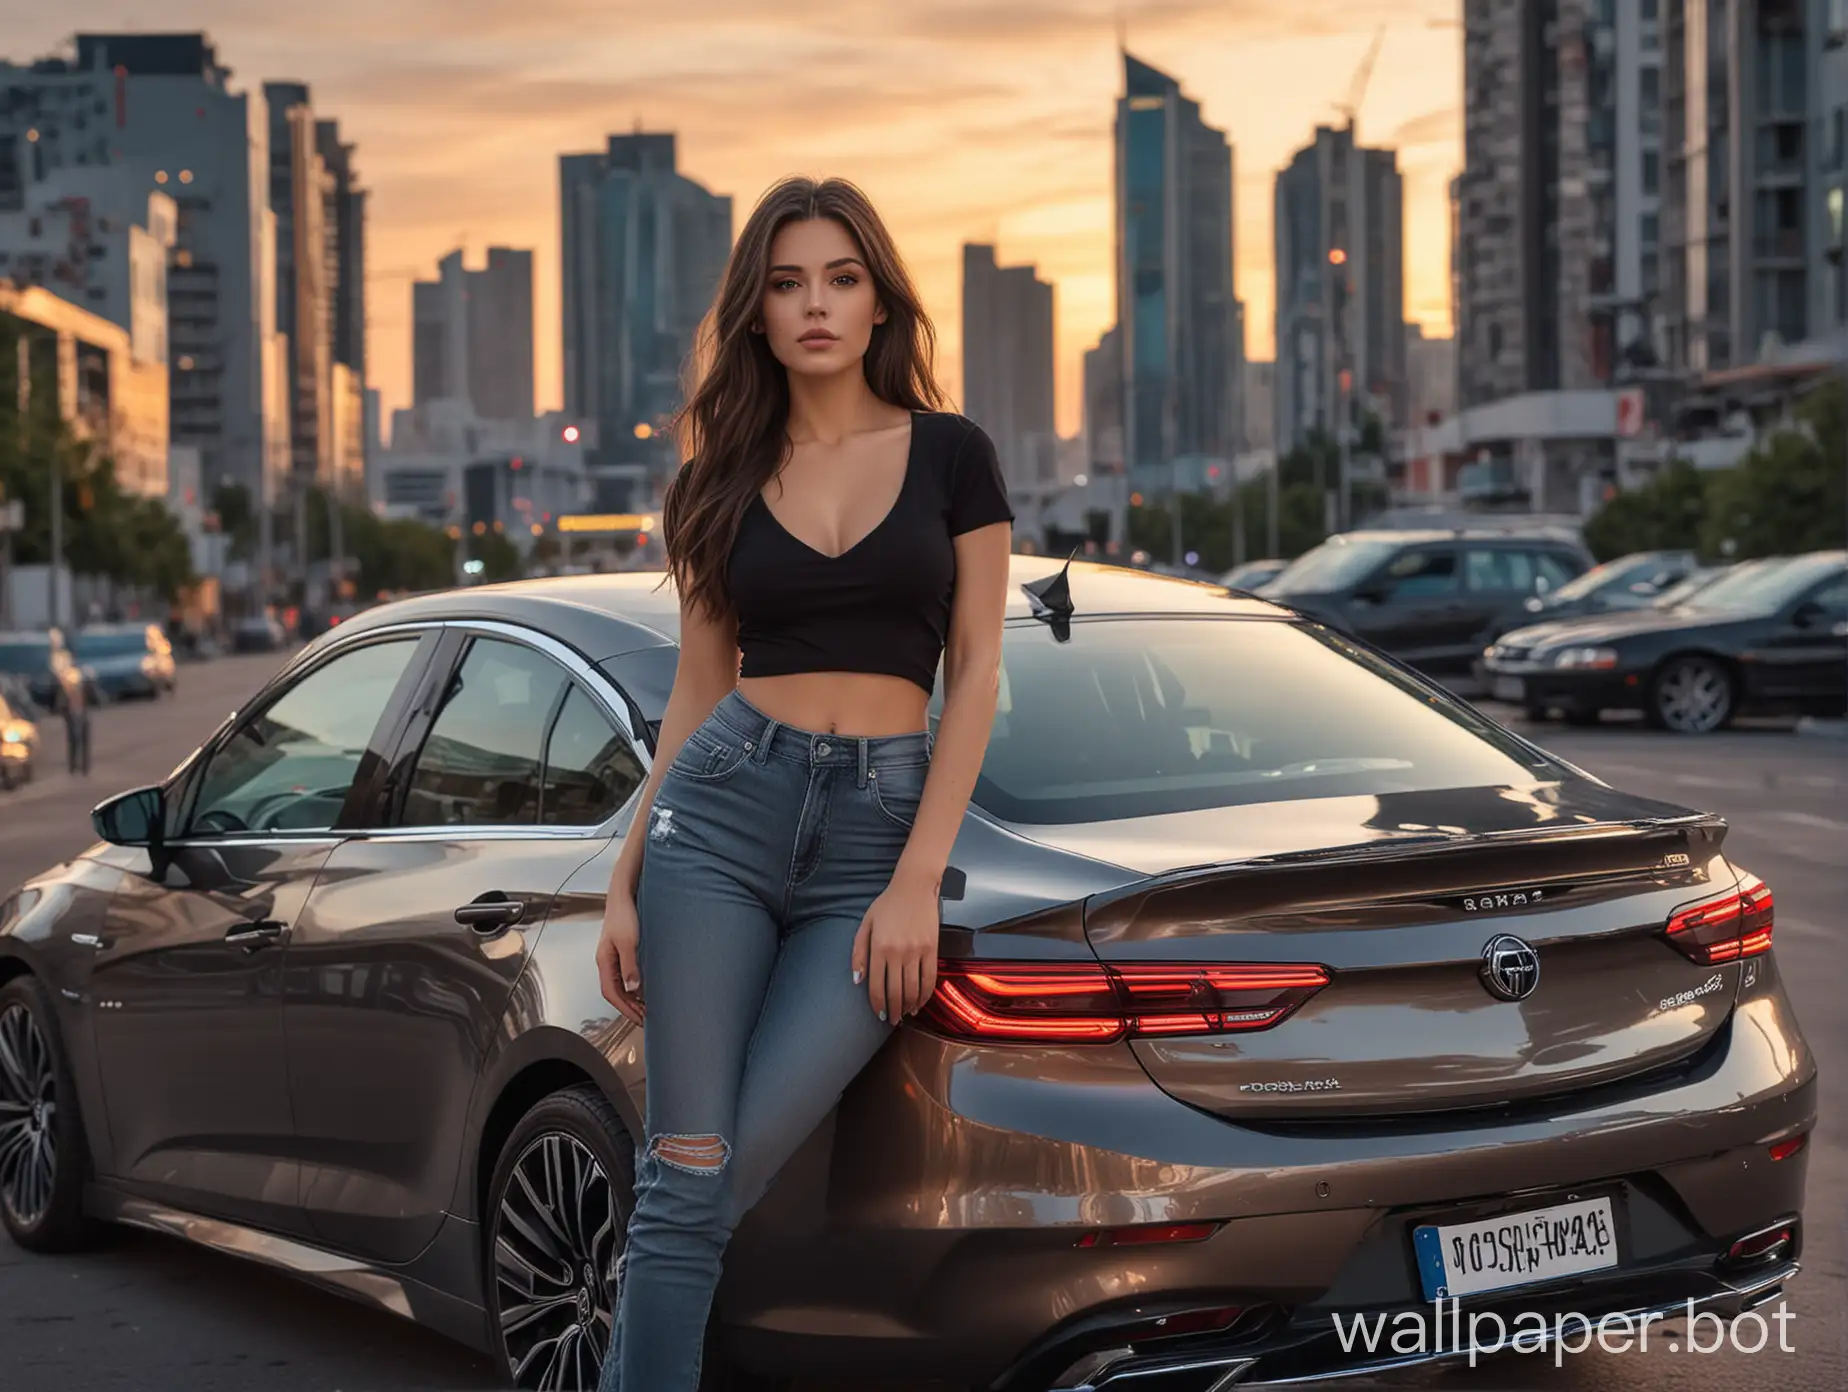 fuller shape woman visible from the back. She has long darkbrown hair (her face isn't visible), wearing black t-shirt with cleavage, jeans and high heels standing near of grey opel insignia grandsport. The car is visible from the front. background is a futuristic city at sunset, synthwave style